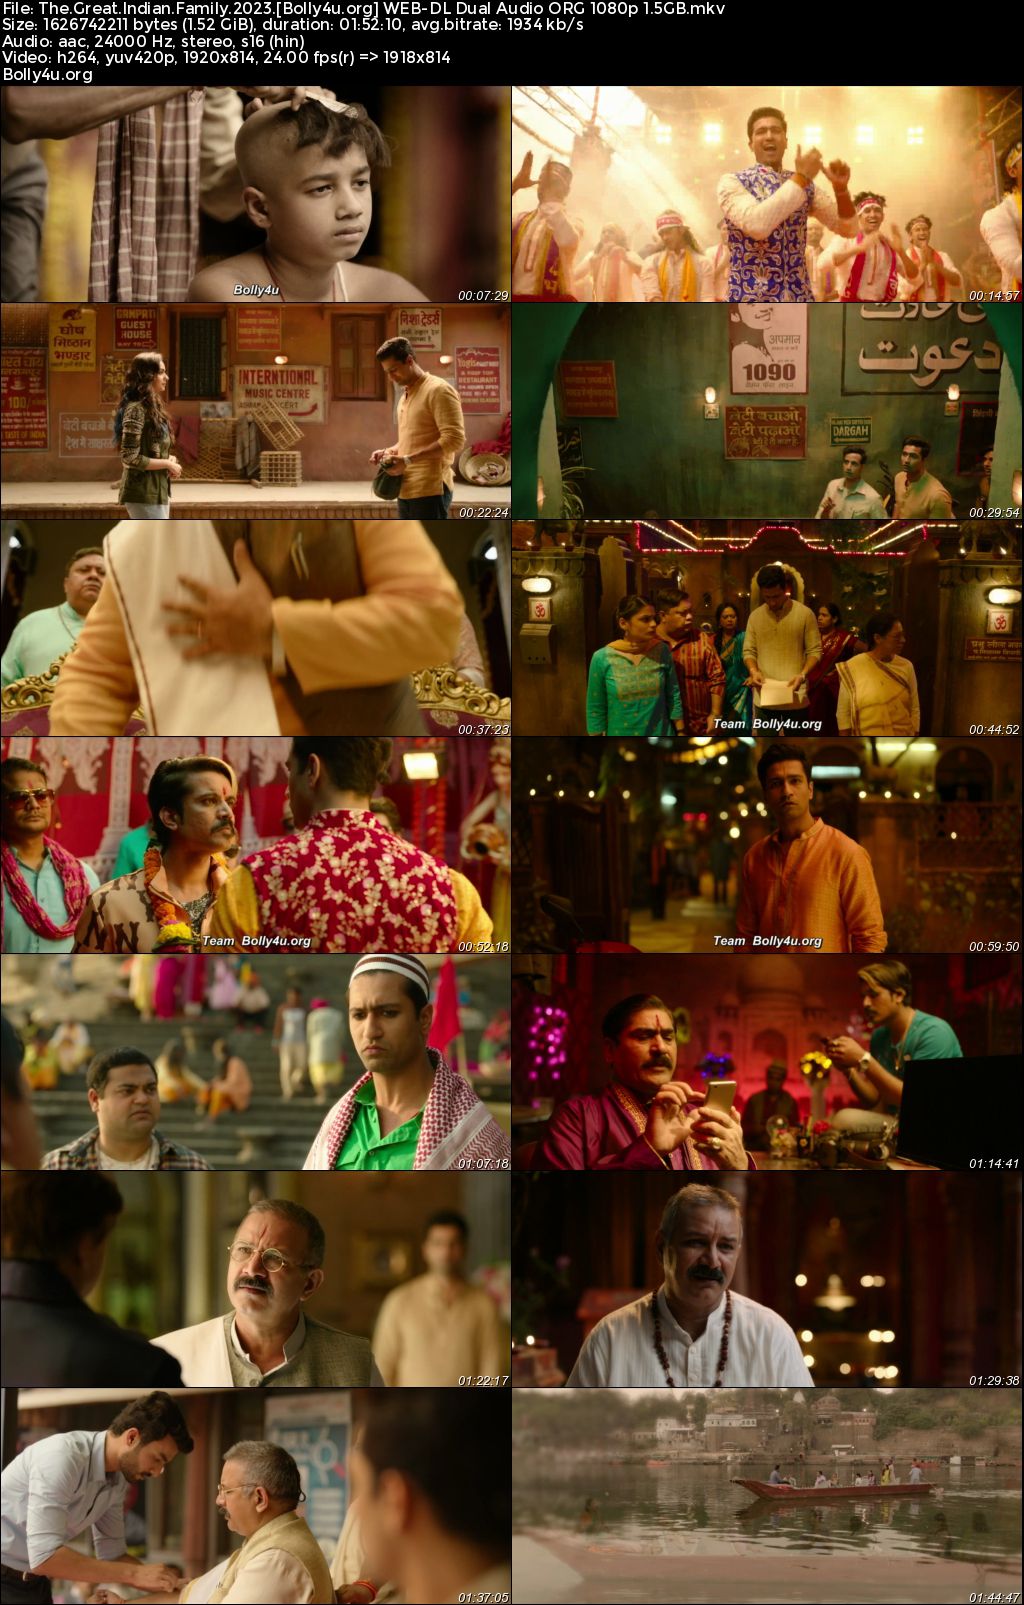 The Great Indian Family 2023 WEB-DL Hindi Full Movie Download 1080p 720p 480p